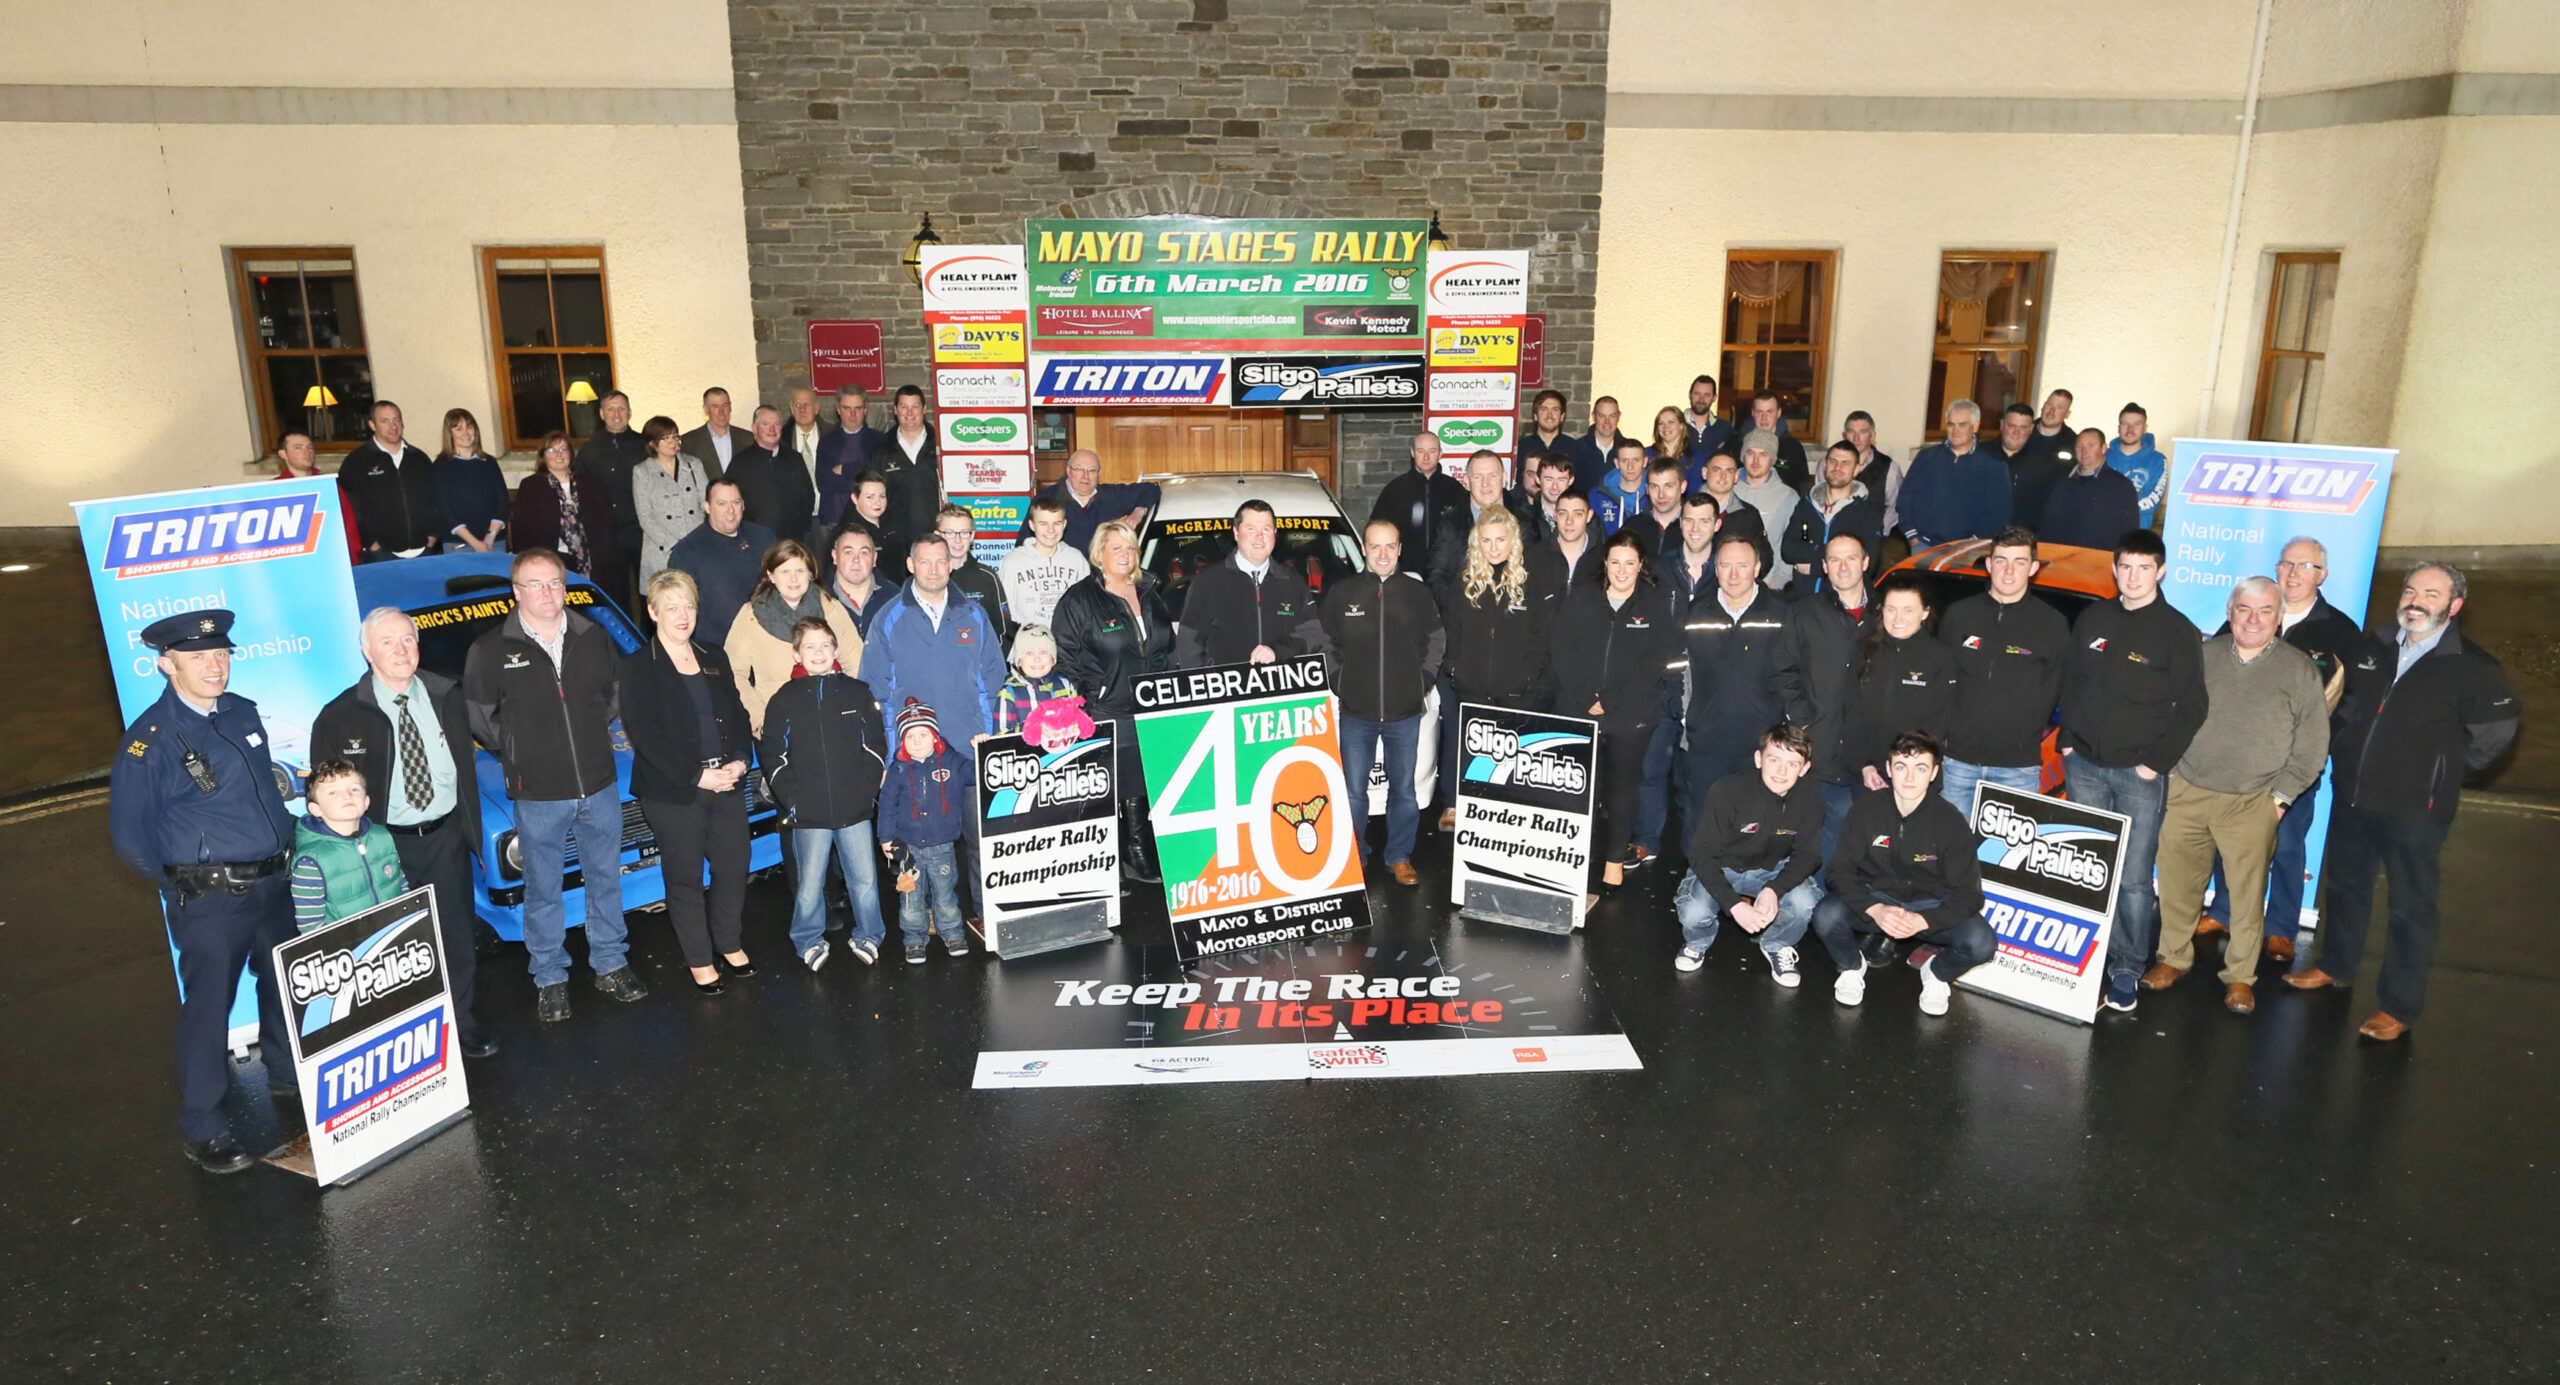 <span class="light">Mayo</span> Stages Rally Launch at Hotel Ballina. Photo: © Michael Donnelly